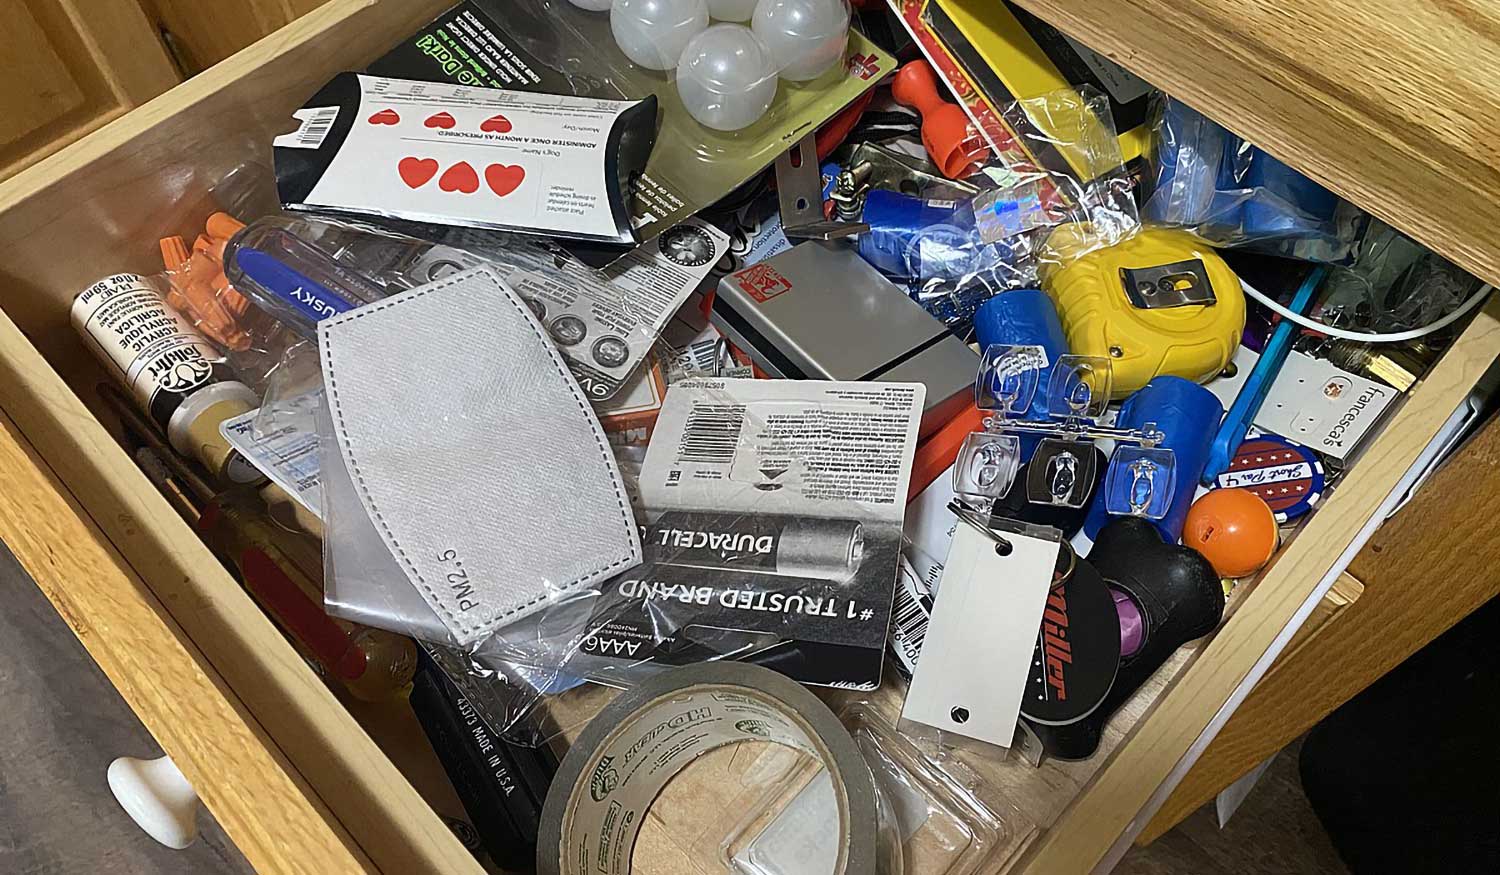 Many of us have a "junk drawer" in our house, where everything gets thrown that we don't have a home for or time to properly deal with. Do we also have "junk drawers" in our lives that need some cleaning up assistance from our Creator?